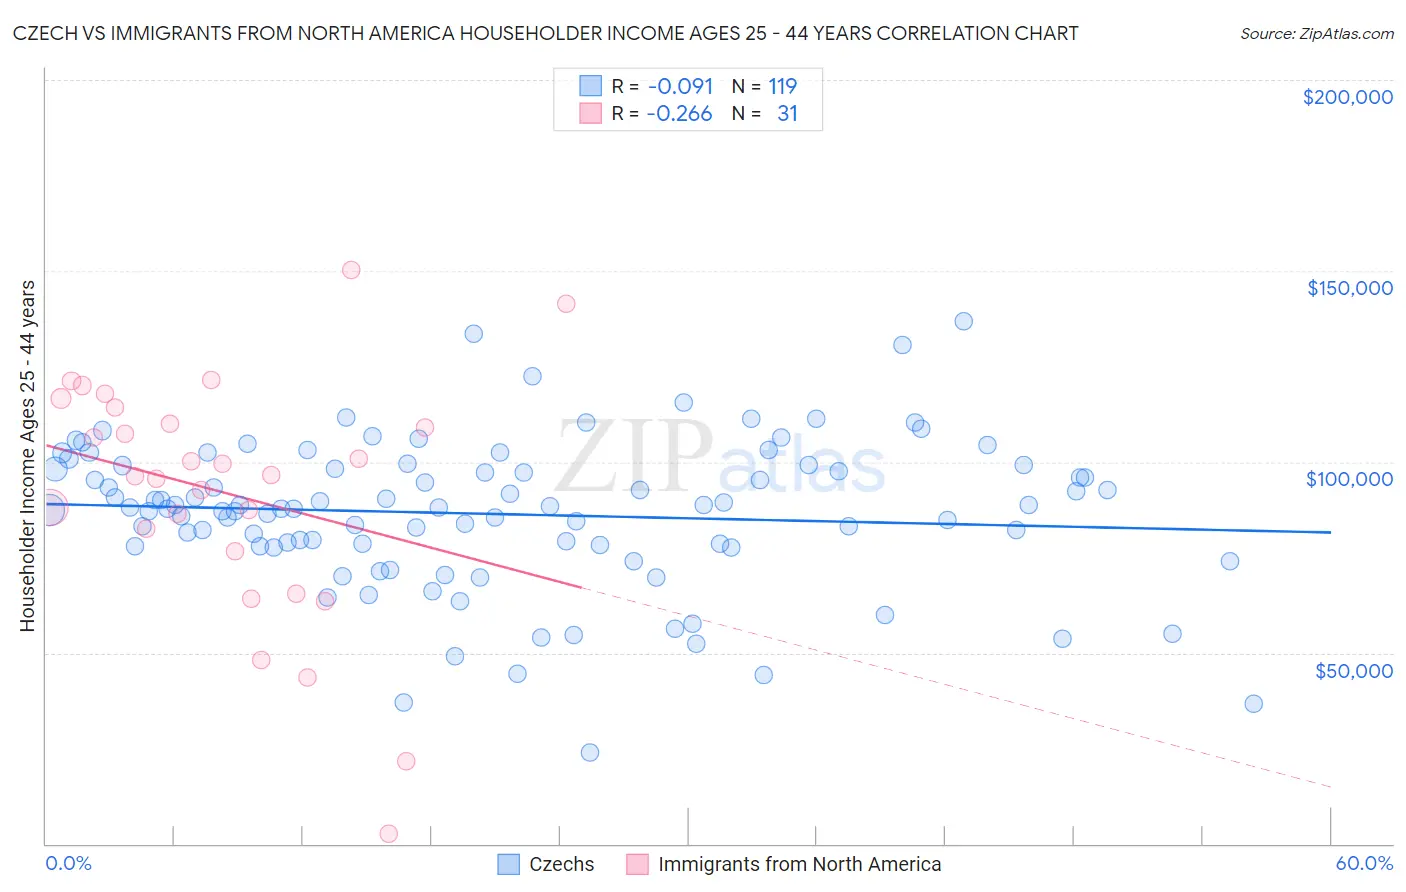 Czech vs Immigrants from North America Householder Income Ages 25 - 44 years